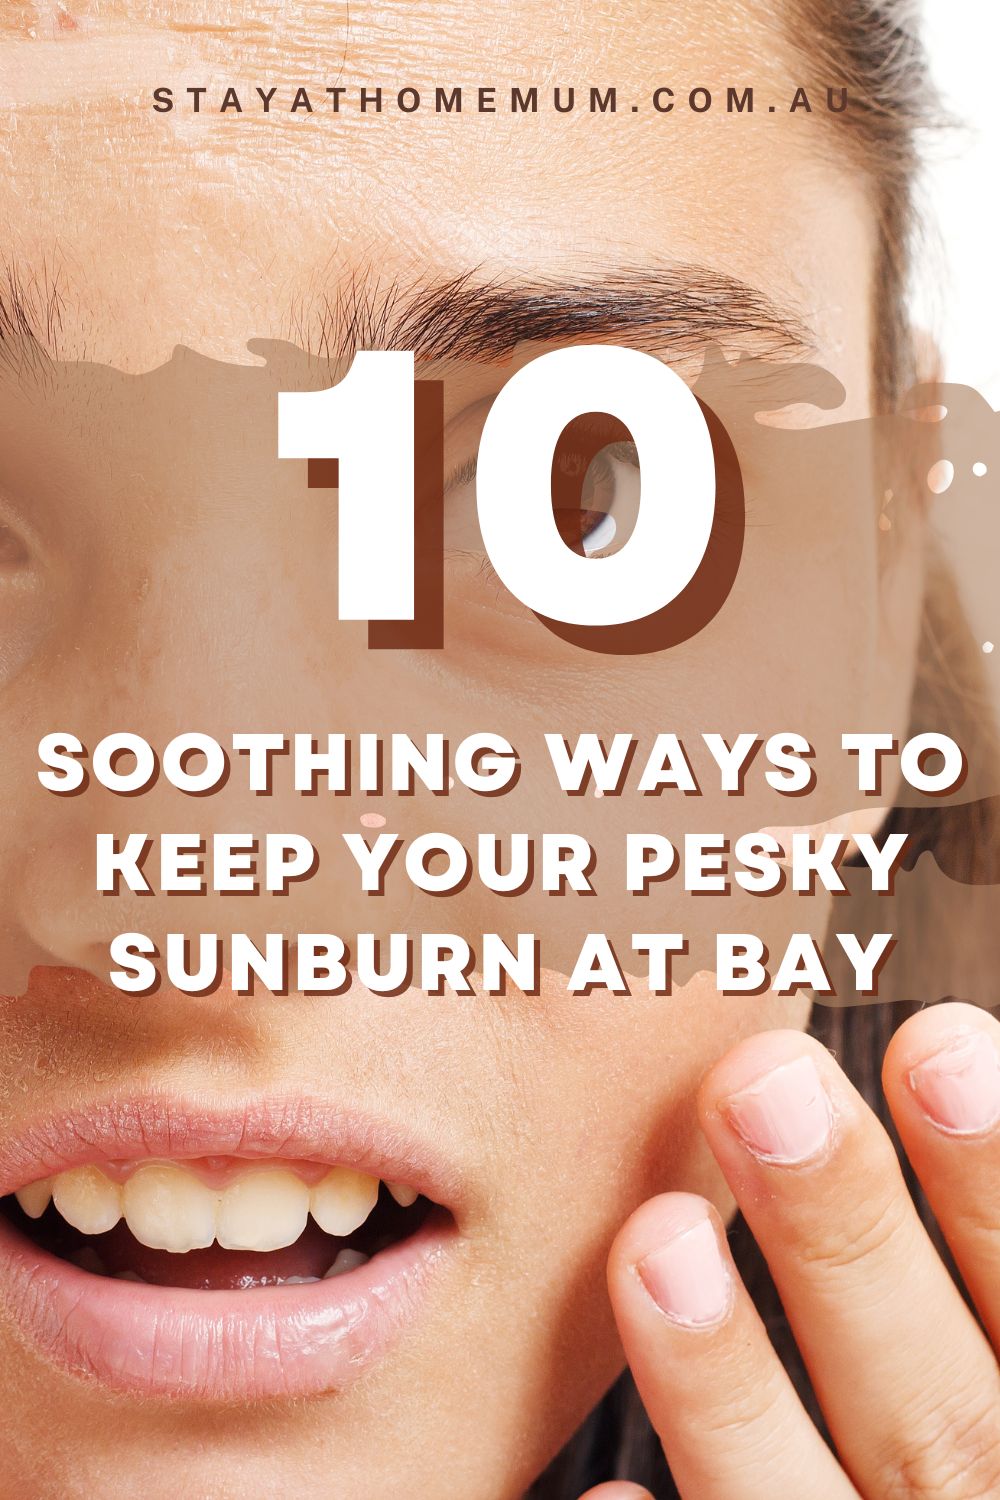 10 Soothing Ways To Keep Your Pesky Sunburn At Bay I Stay at Home Mum